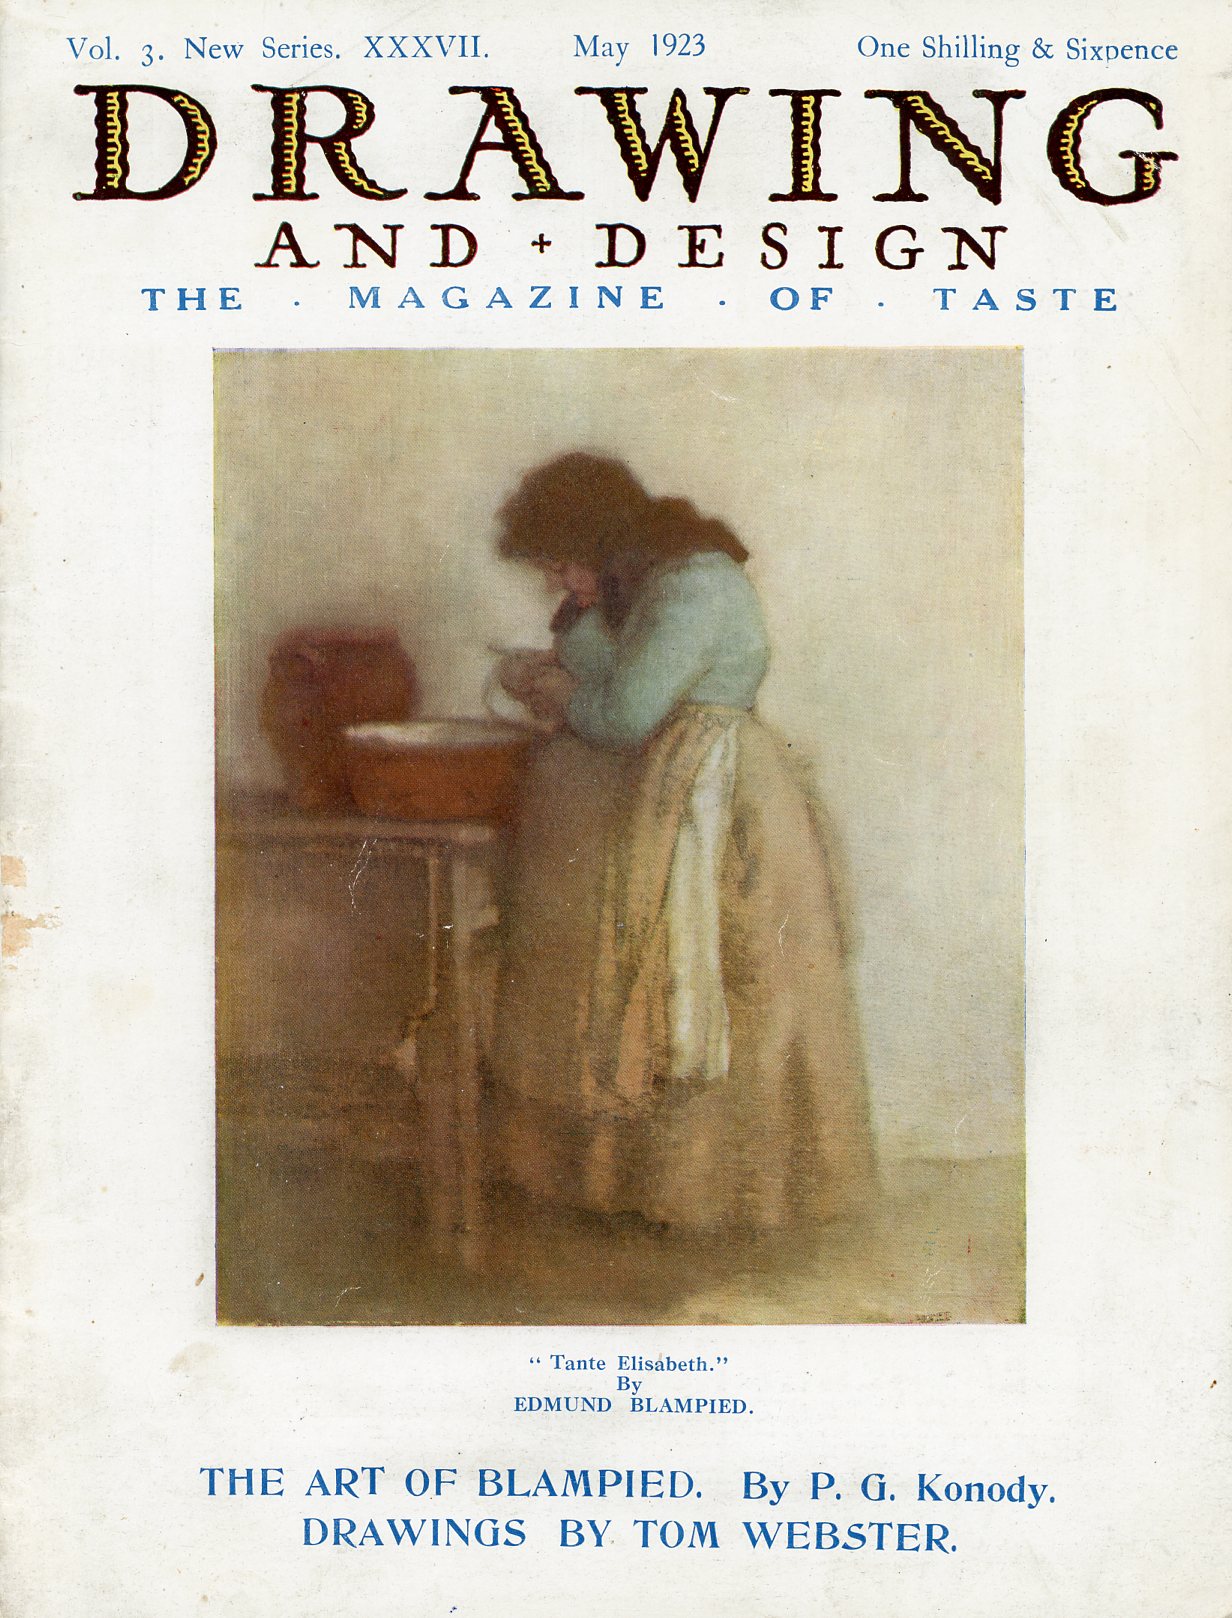 Image of cover of magazine